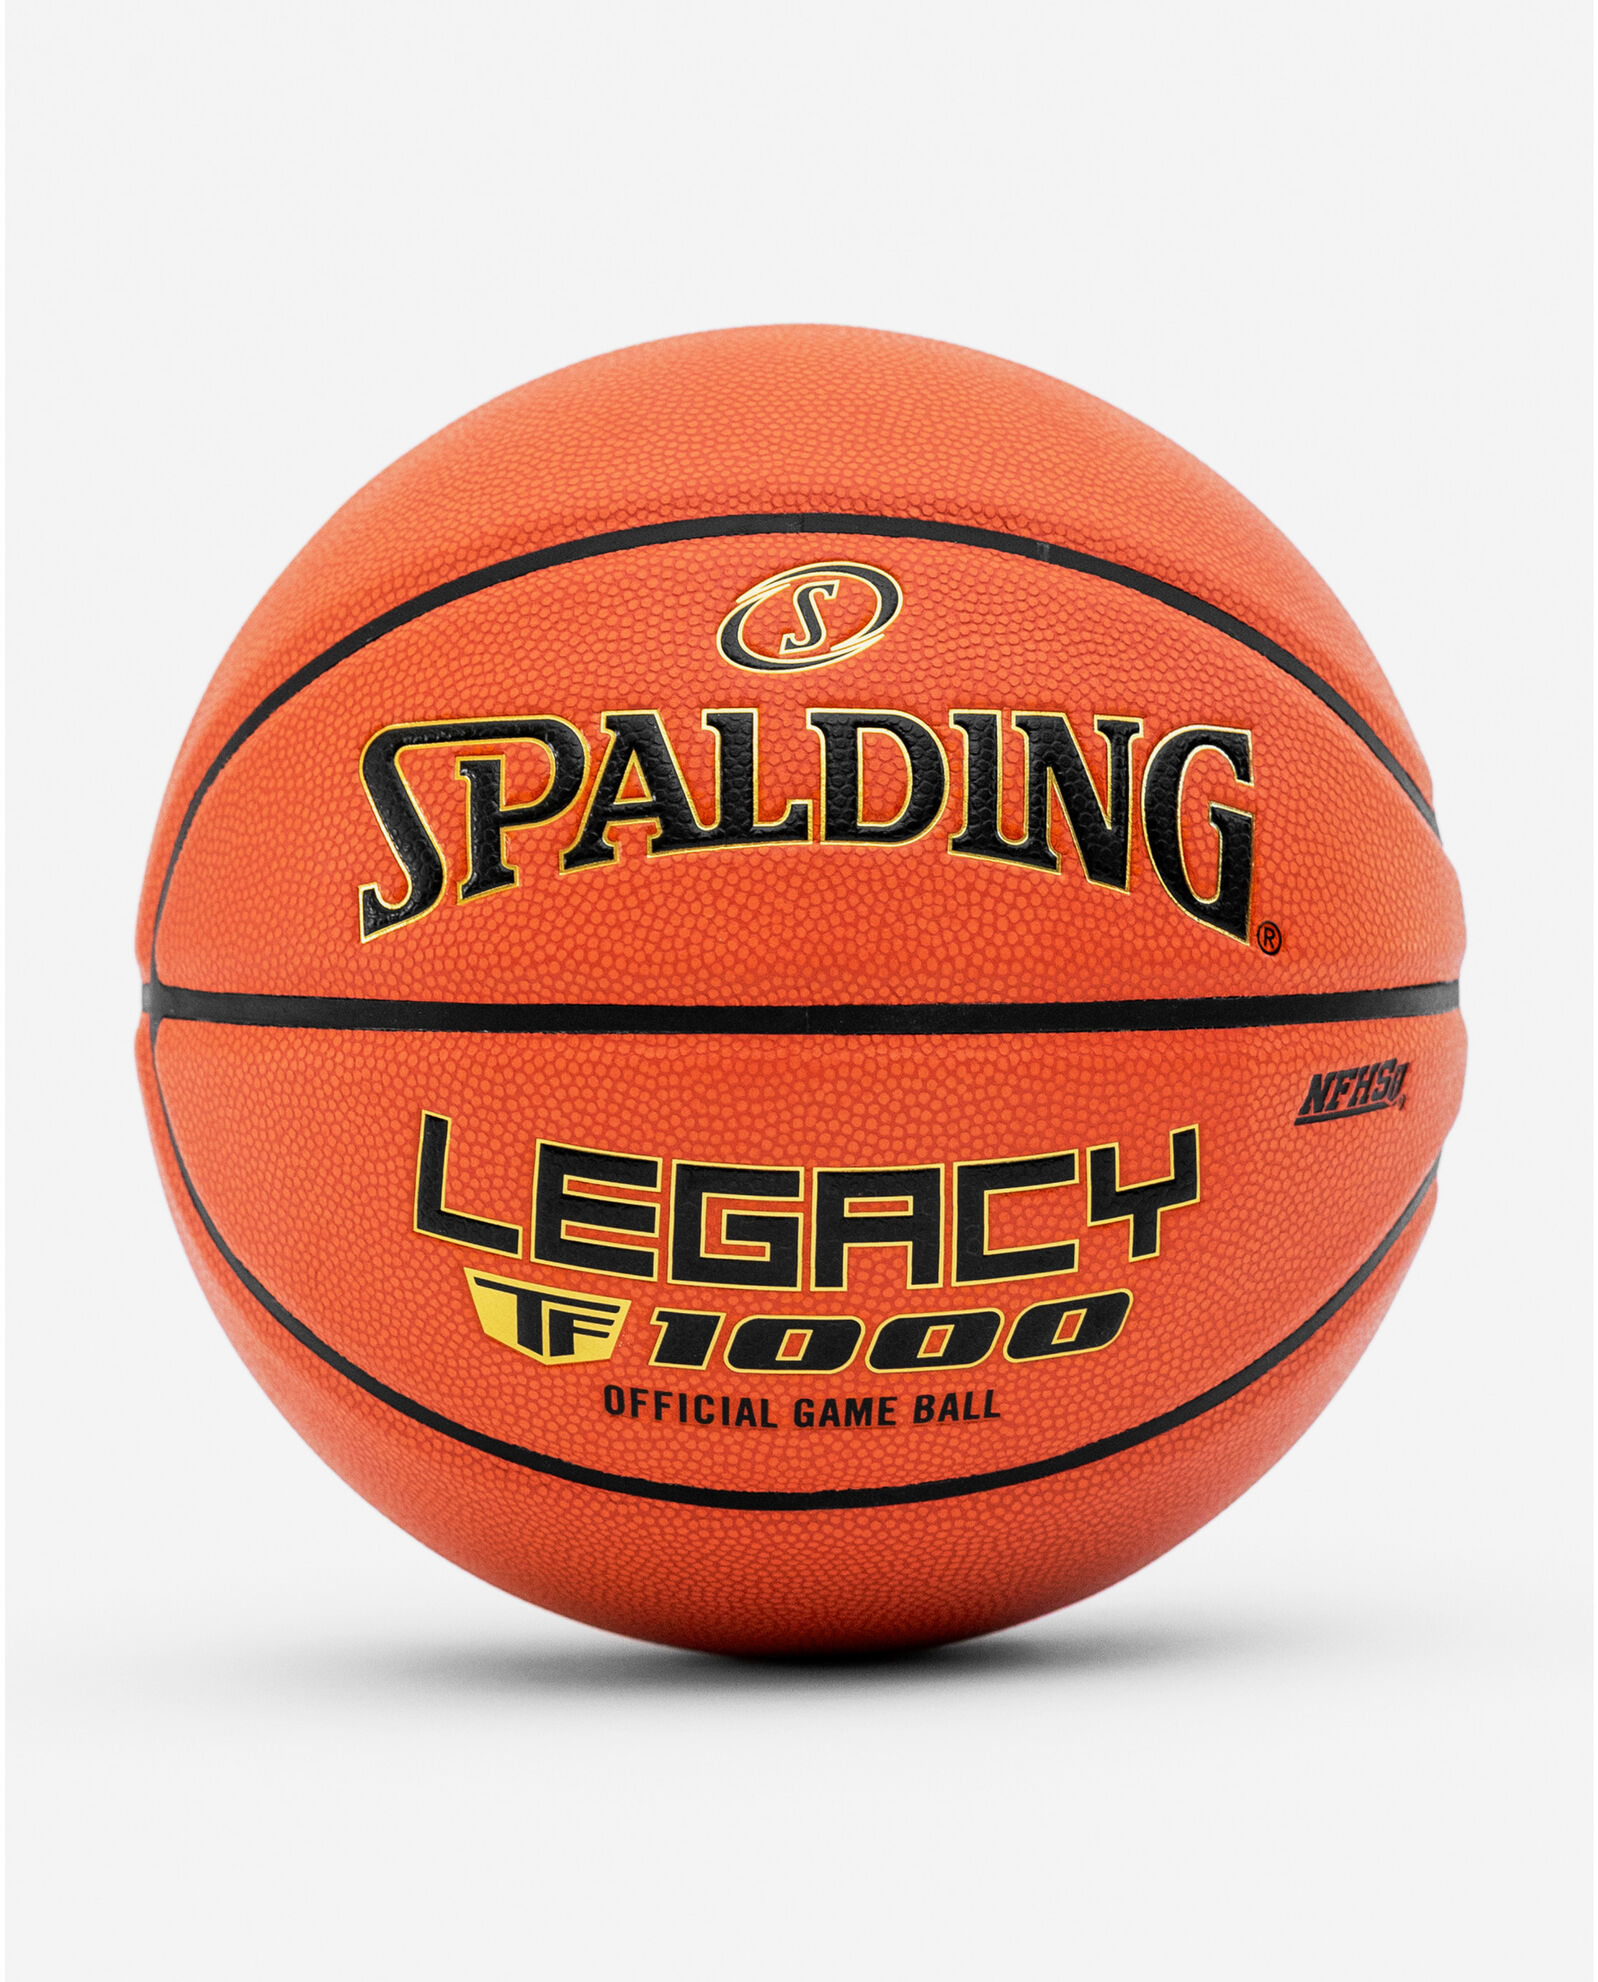 Spalding Legacy TF-1000 Indoor Game Basketball l